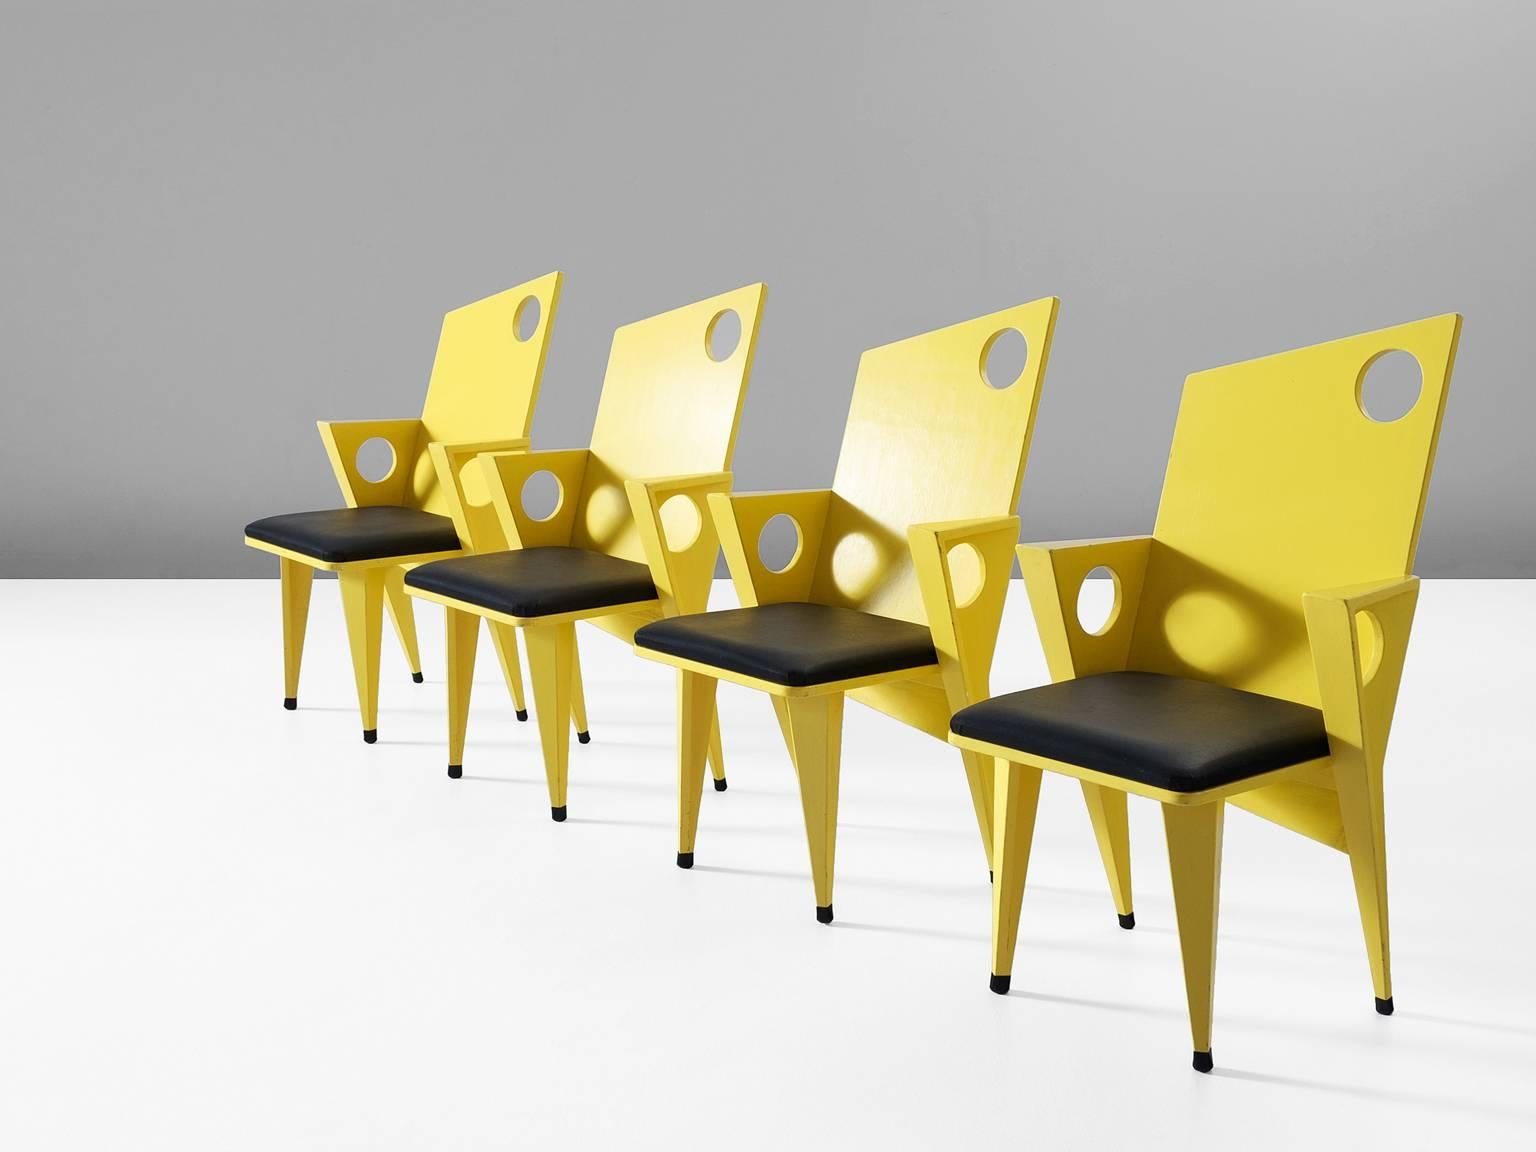 Set of four armchairs, in wood and faux-leather, Europe, 1980s.

Set of four frivolous armchairs in bright yellow. These Memphis style chairs are designed with angles and diagonal lines. Except from the seating all parts are basically designed